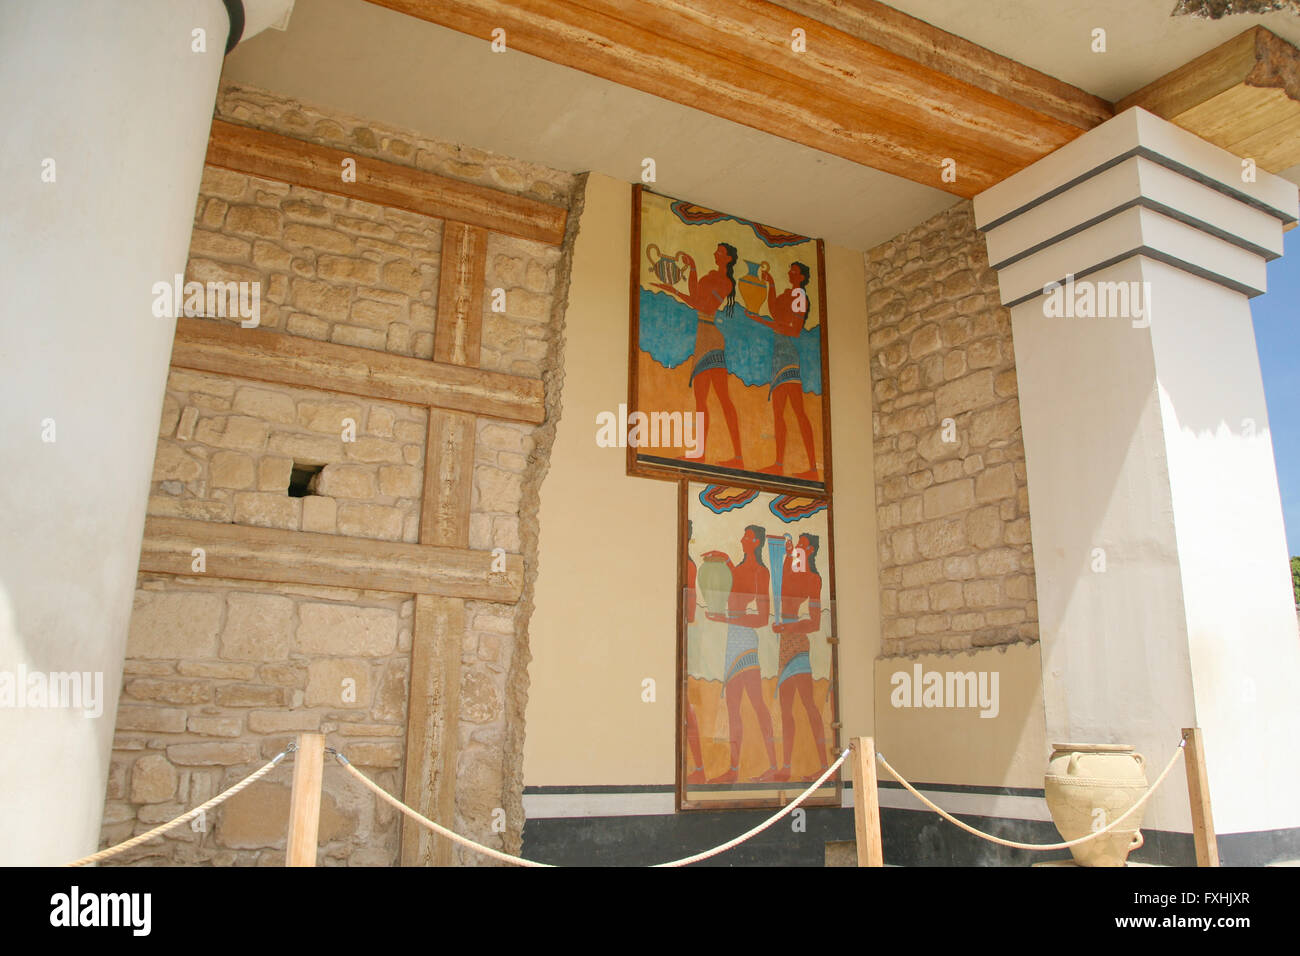 landmark monument minoan paints on wall in Knossos palace, from 2000 year Before Christ, one of the most important greek monumen Stock Photo